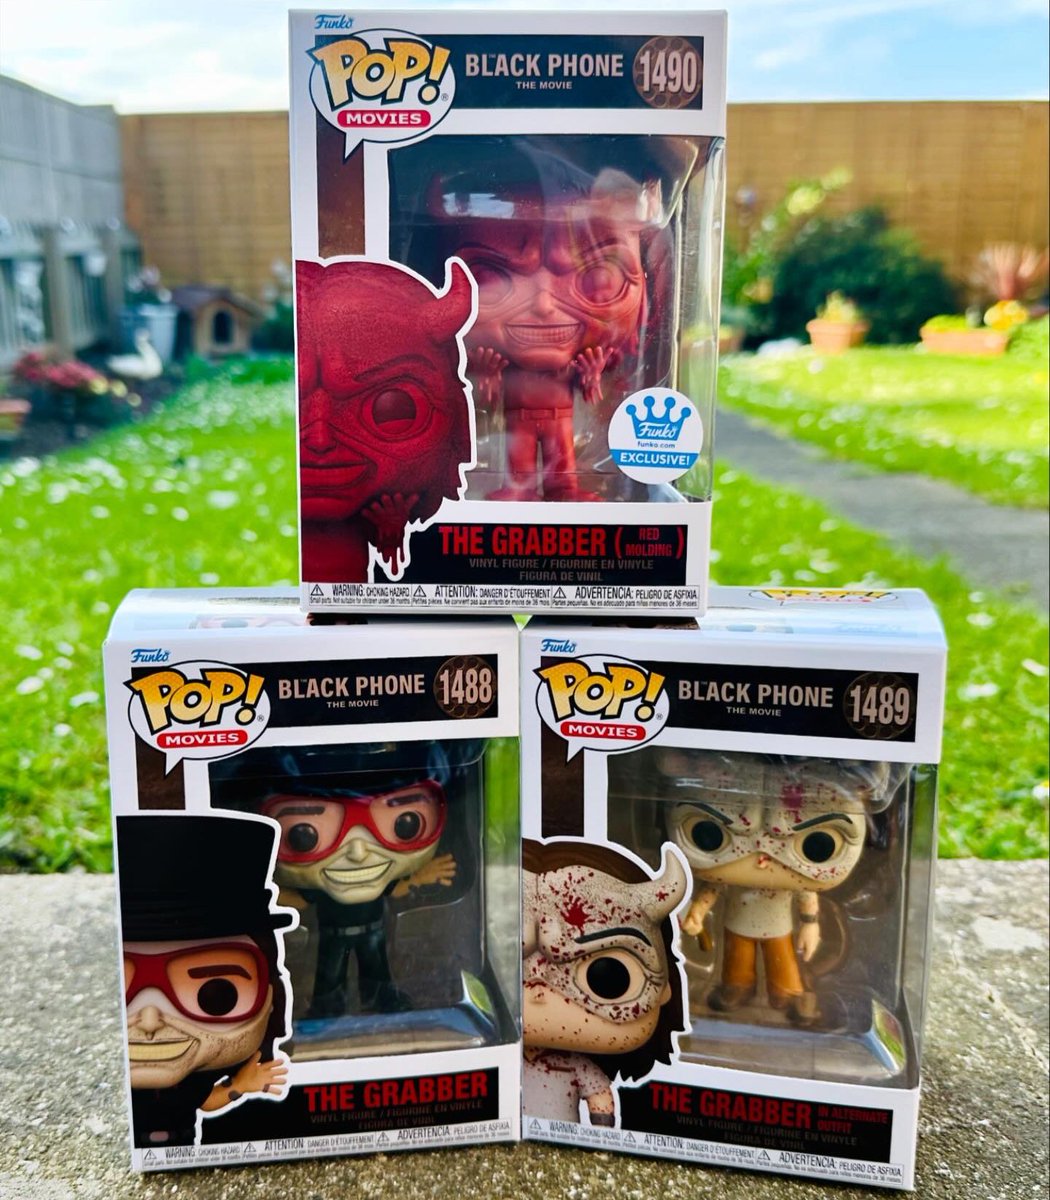 Awesome little evening mail call from @FunkoEurope to come home too! 😍

No chase unfortunately but as always, I bought it over retail as I just had to have it for my set! 😅📞🤩😍

#FunkoPOPVinyl #MyFunkoStory #FunkoUnboxed #Funko

@OriginalFunko